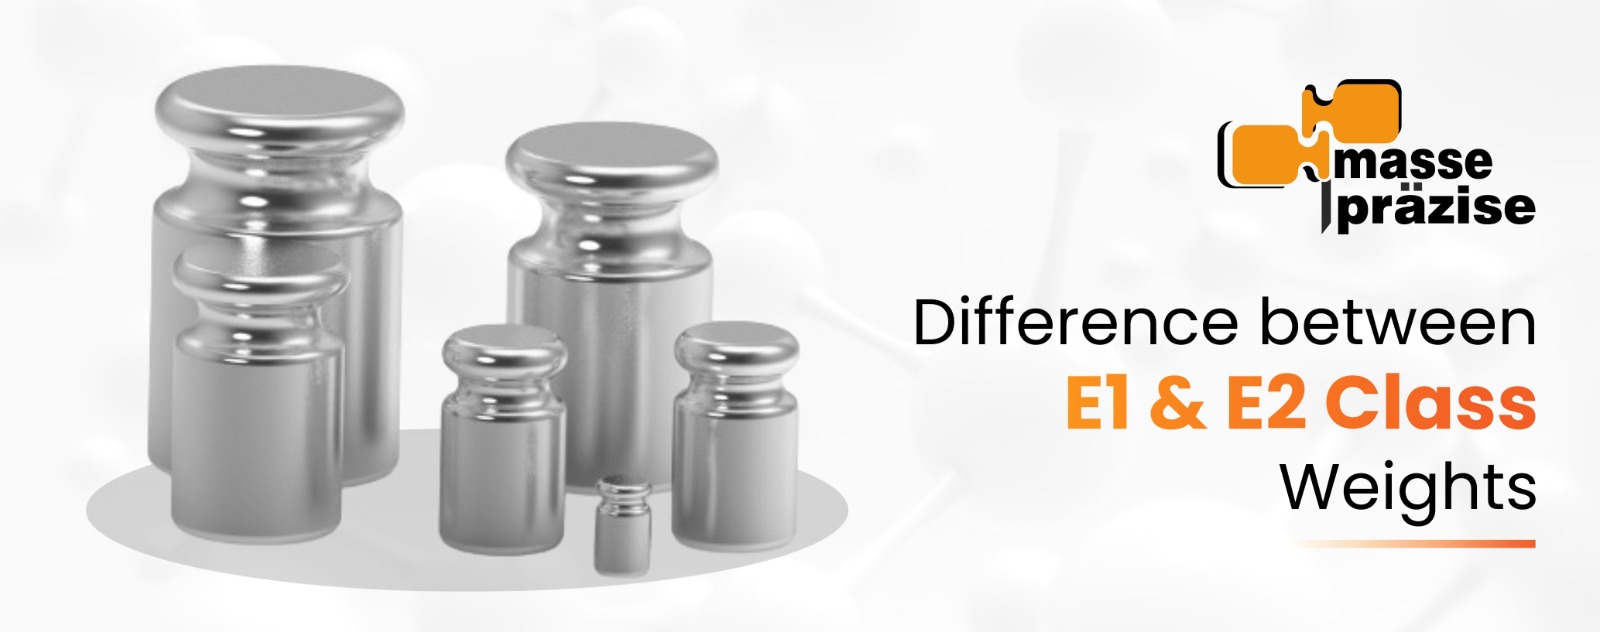 Difference between E1 & E2 Class Weights